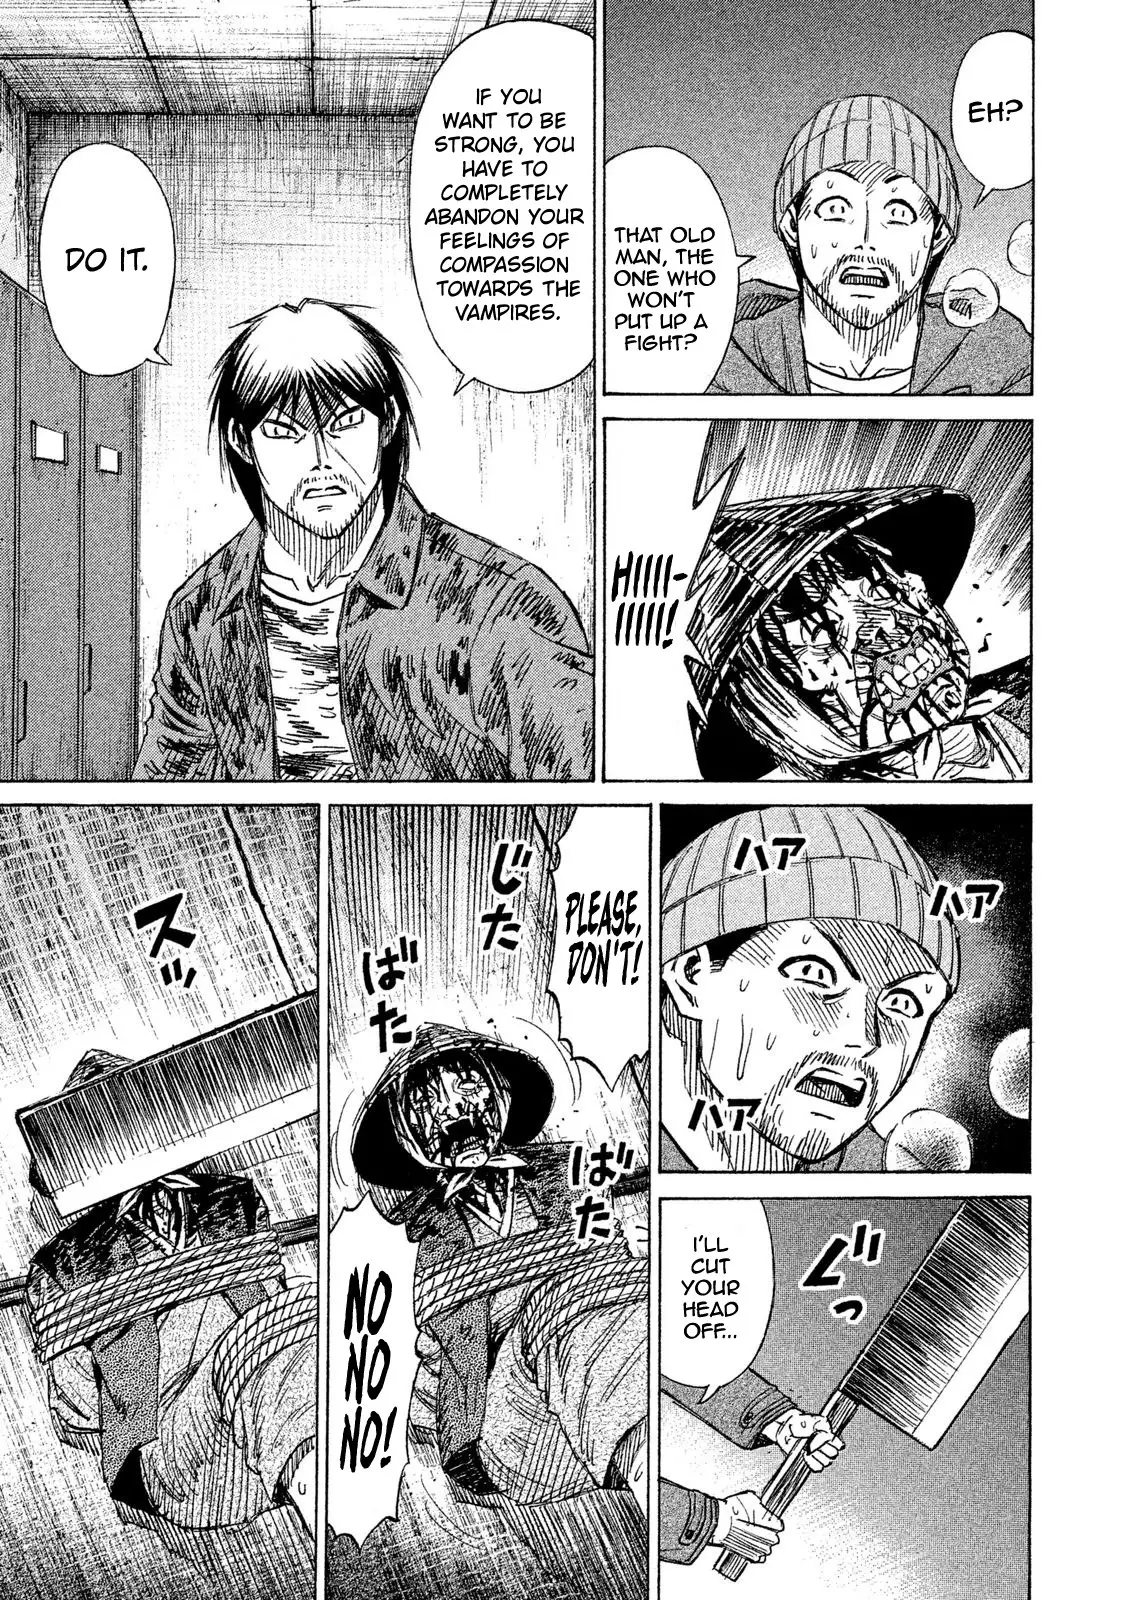 Higanjima - 48 Days Later - 19 page 7-c679dccd